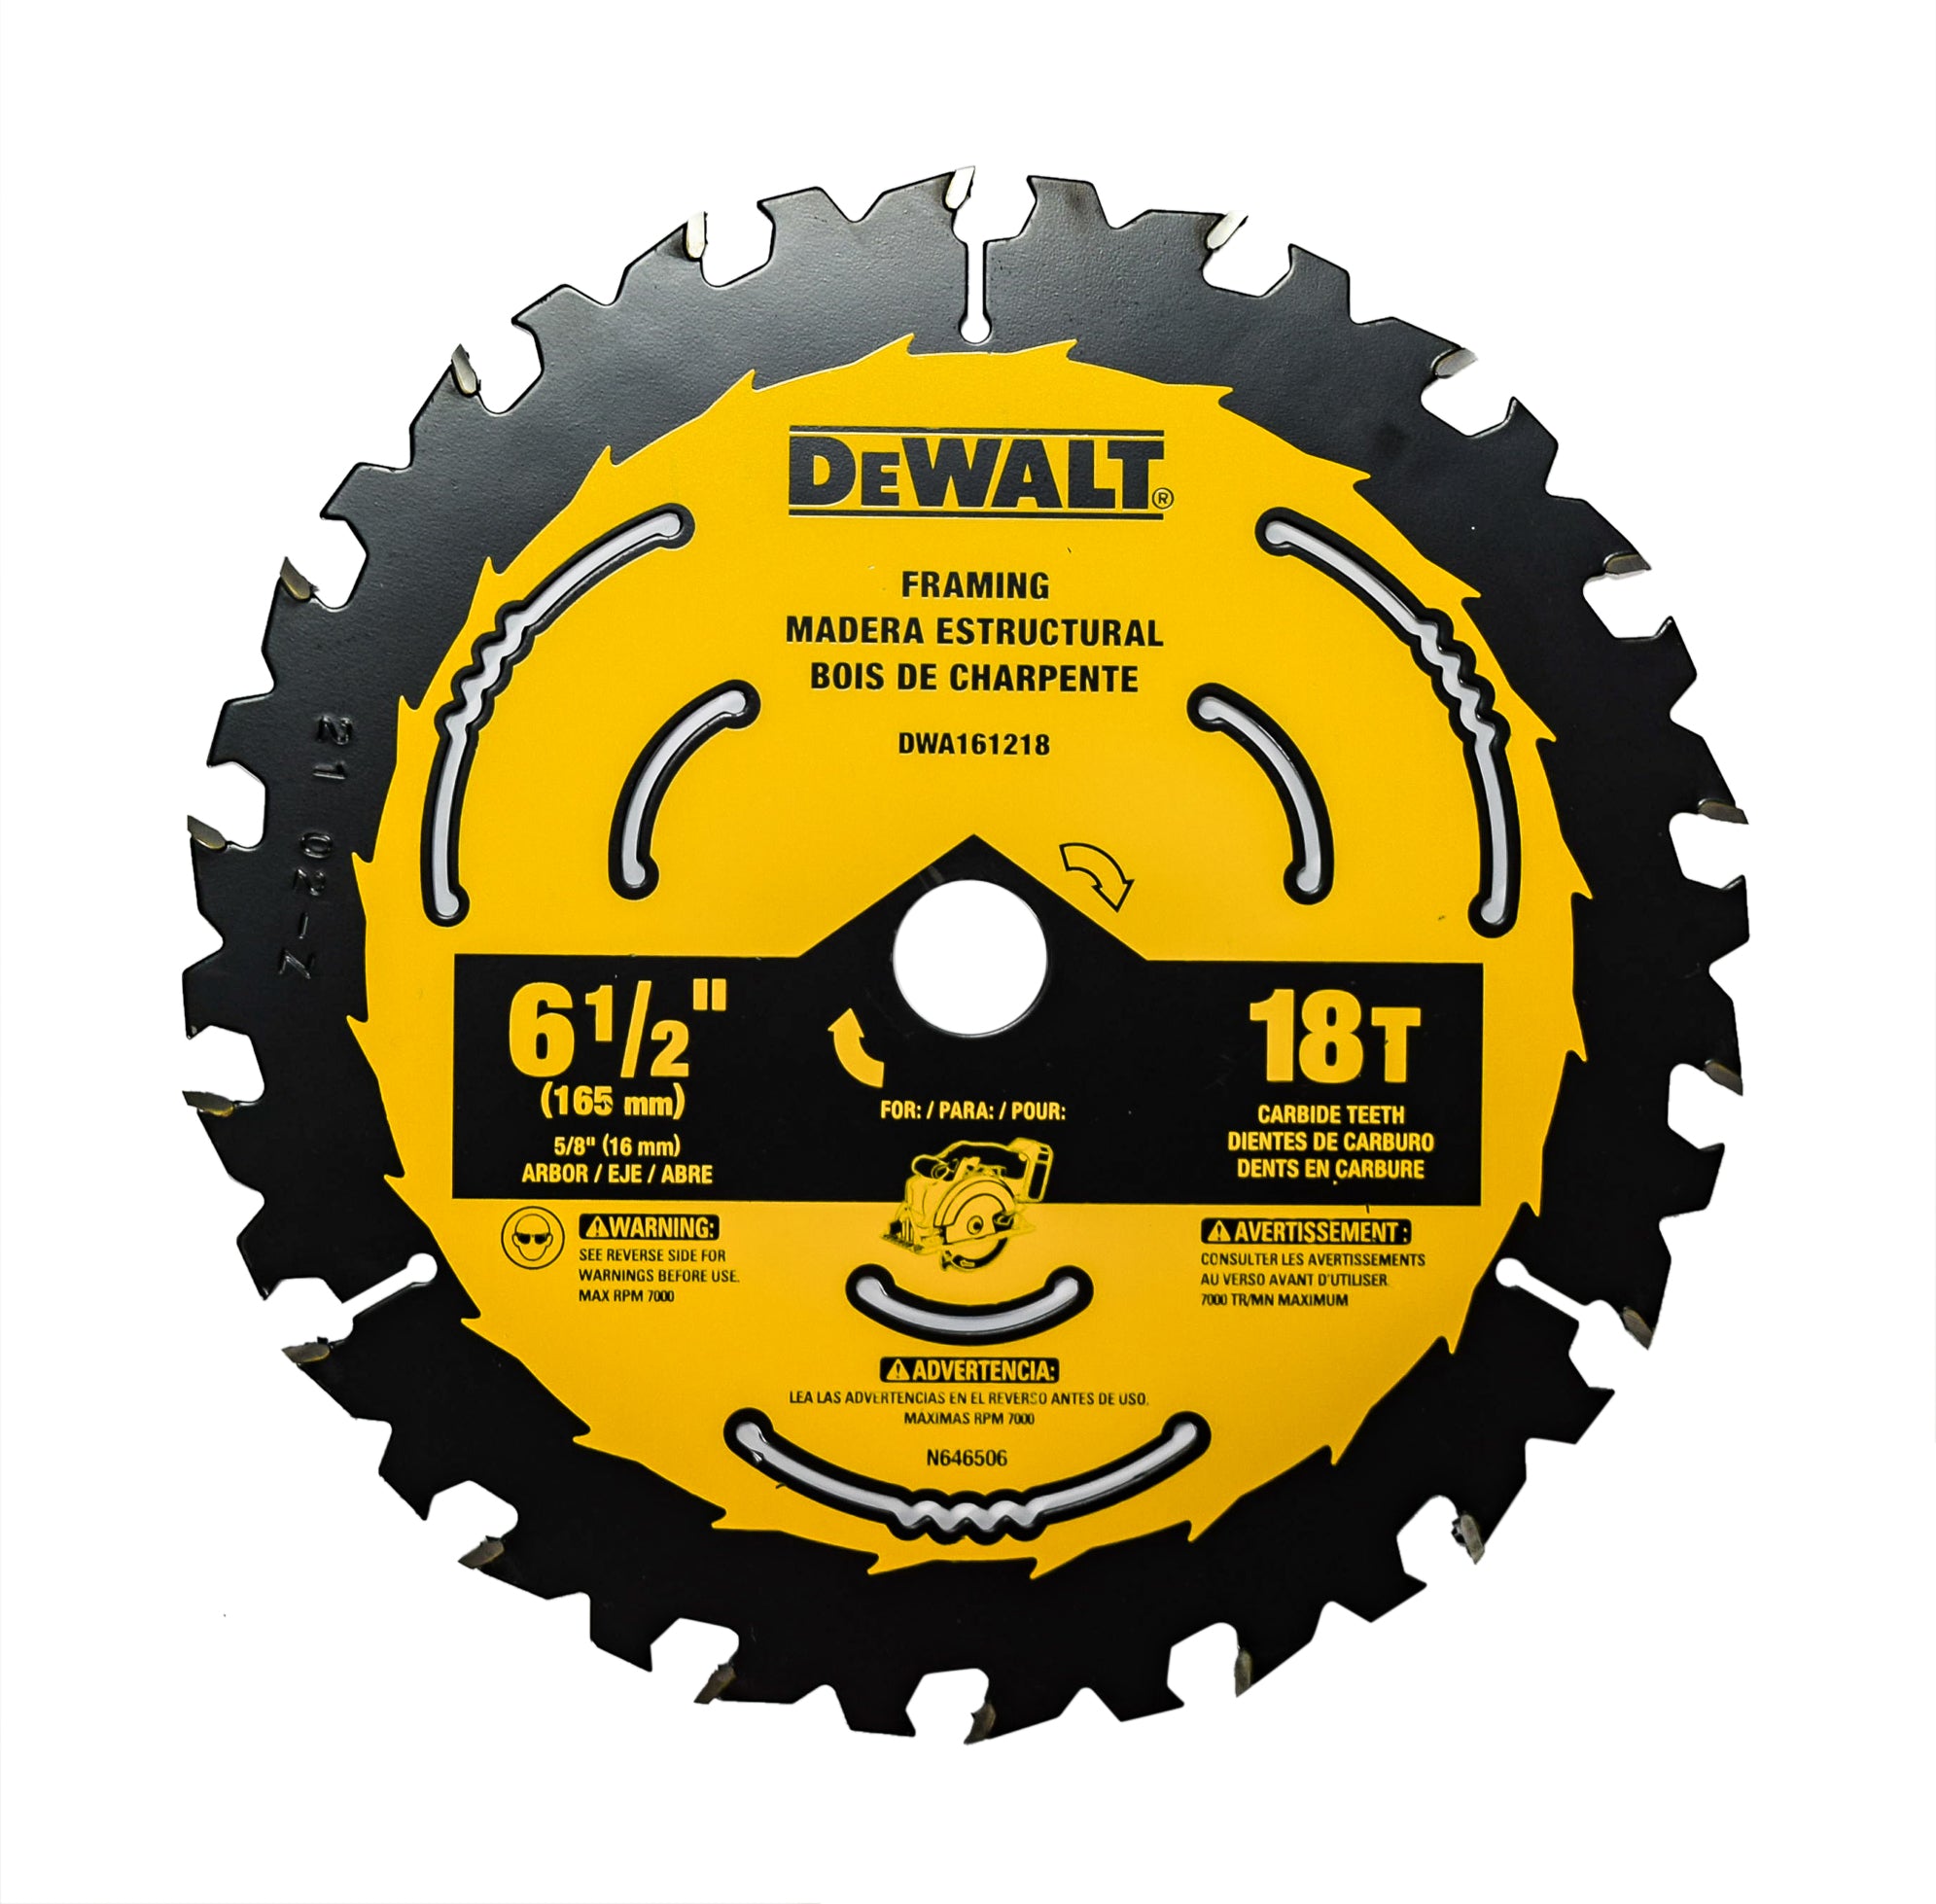 Dewalt DCS565B 20-Volt MAX Cordless Brushless 6-1/2 in. Circular Saw (Tool-Only)